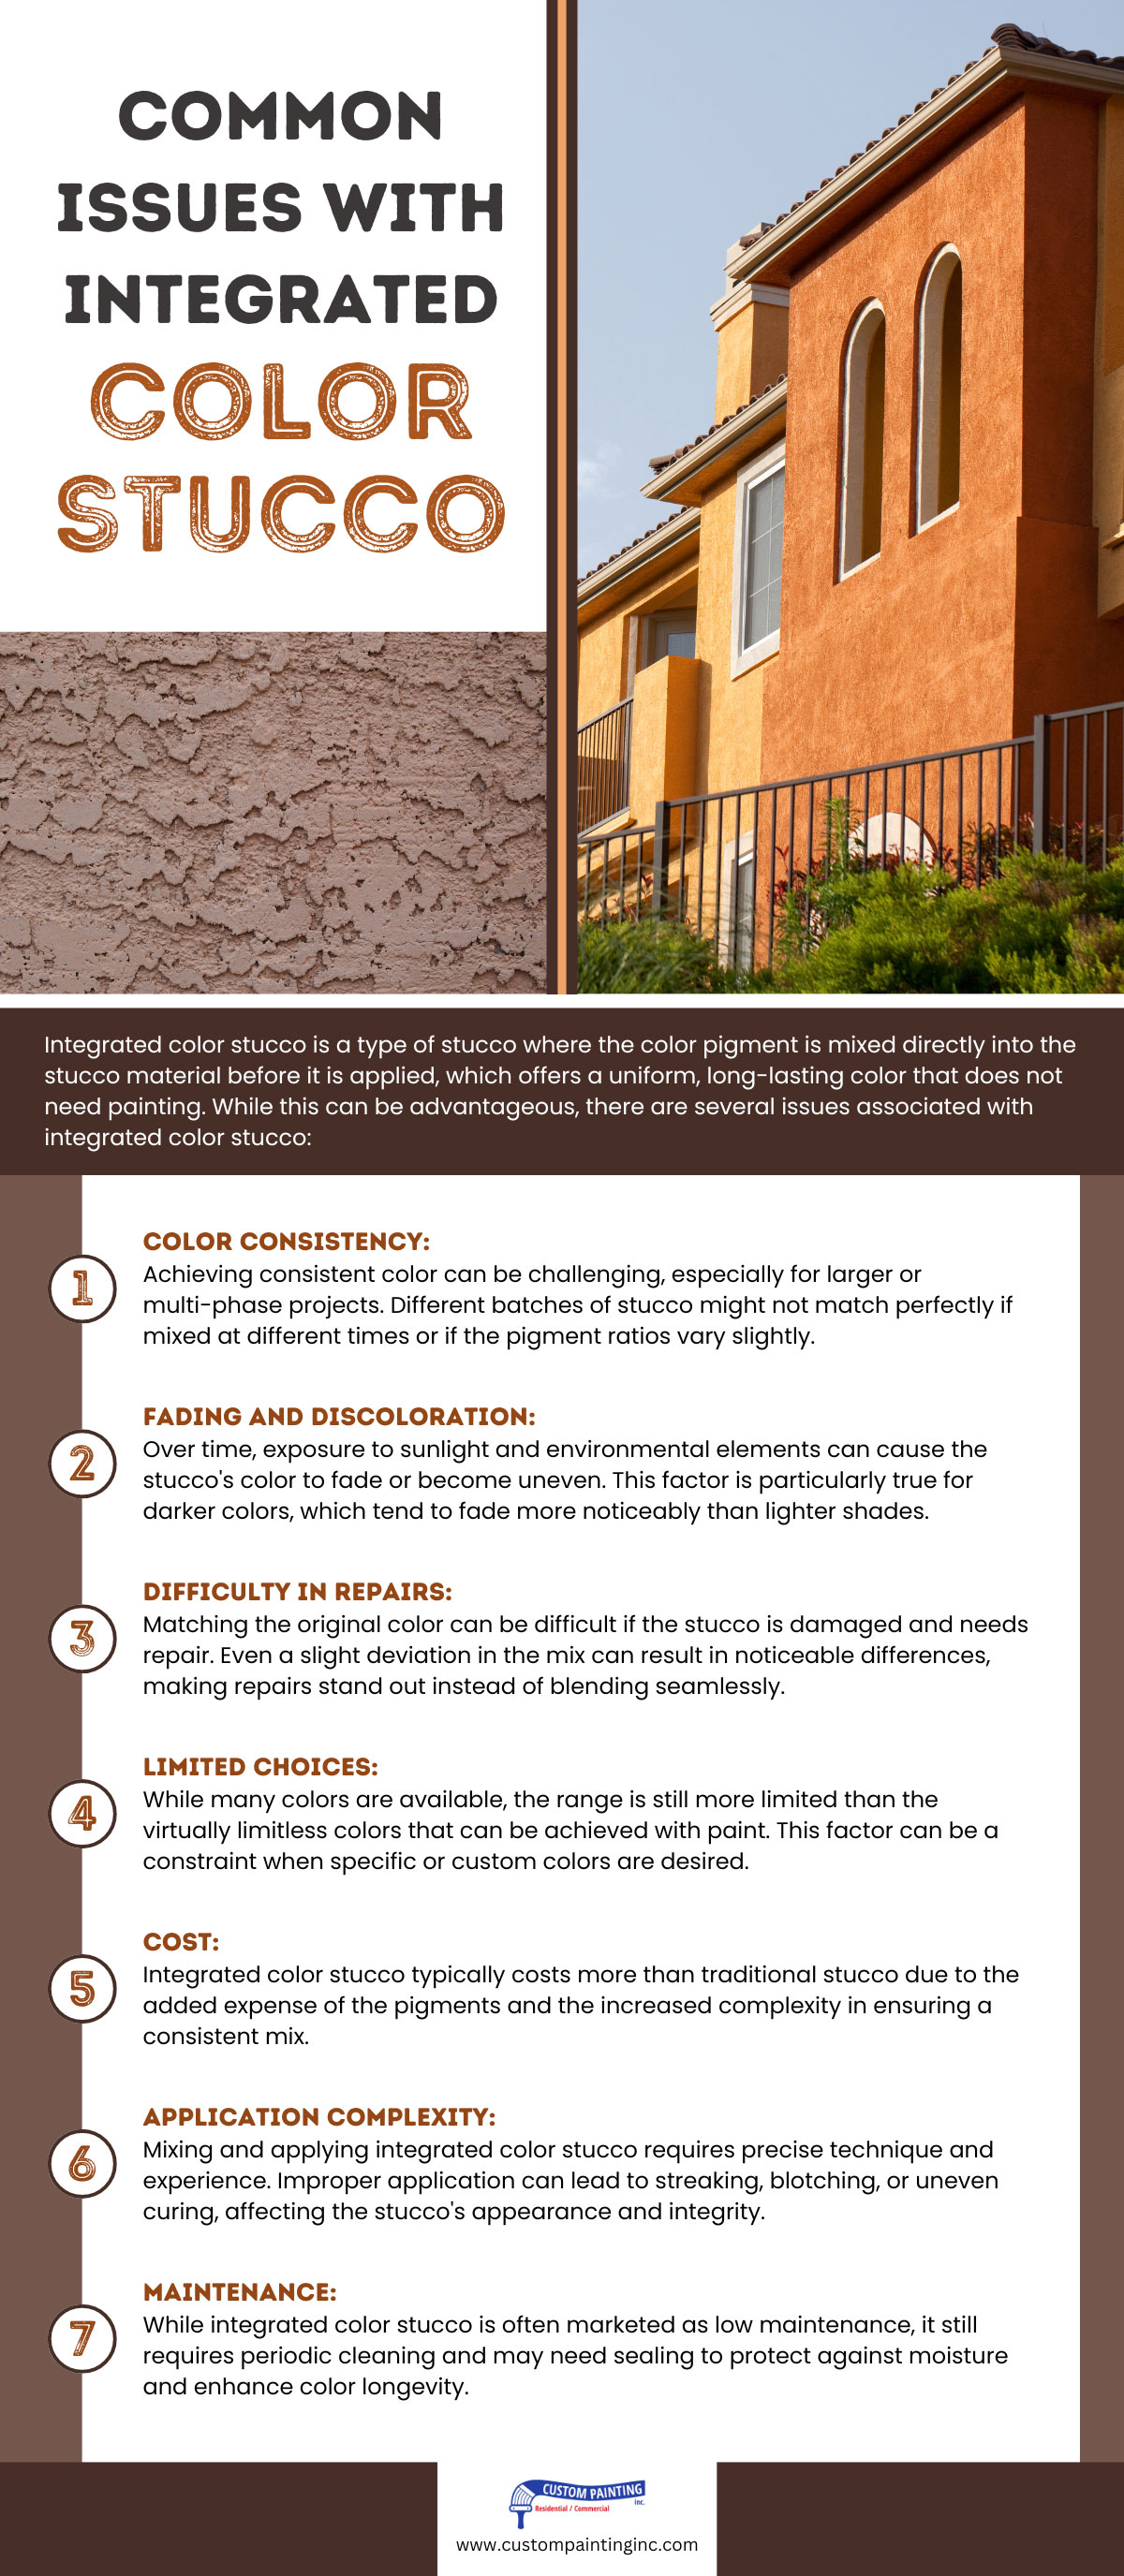 Common issues with integrated color stucco